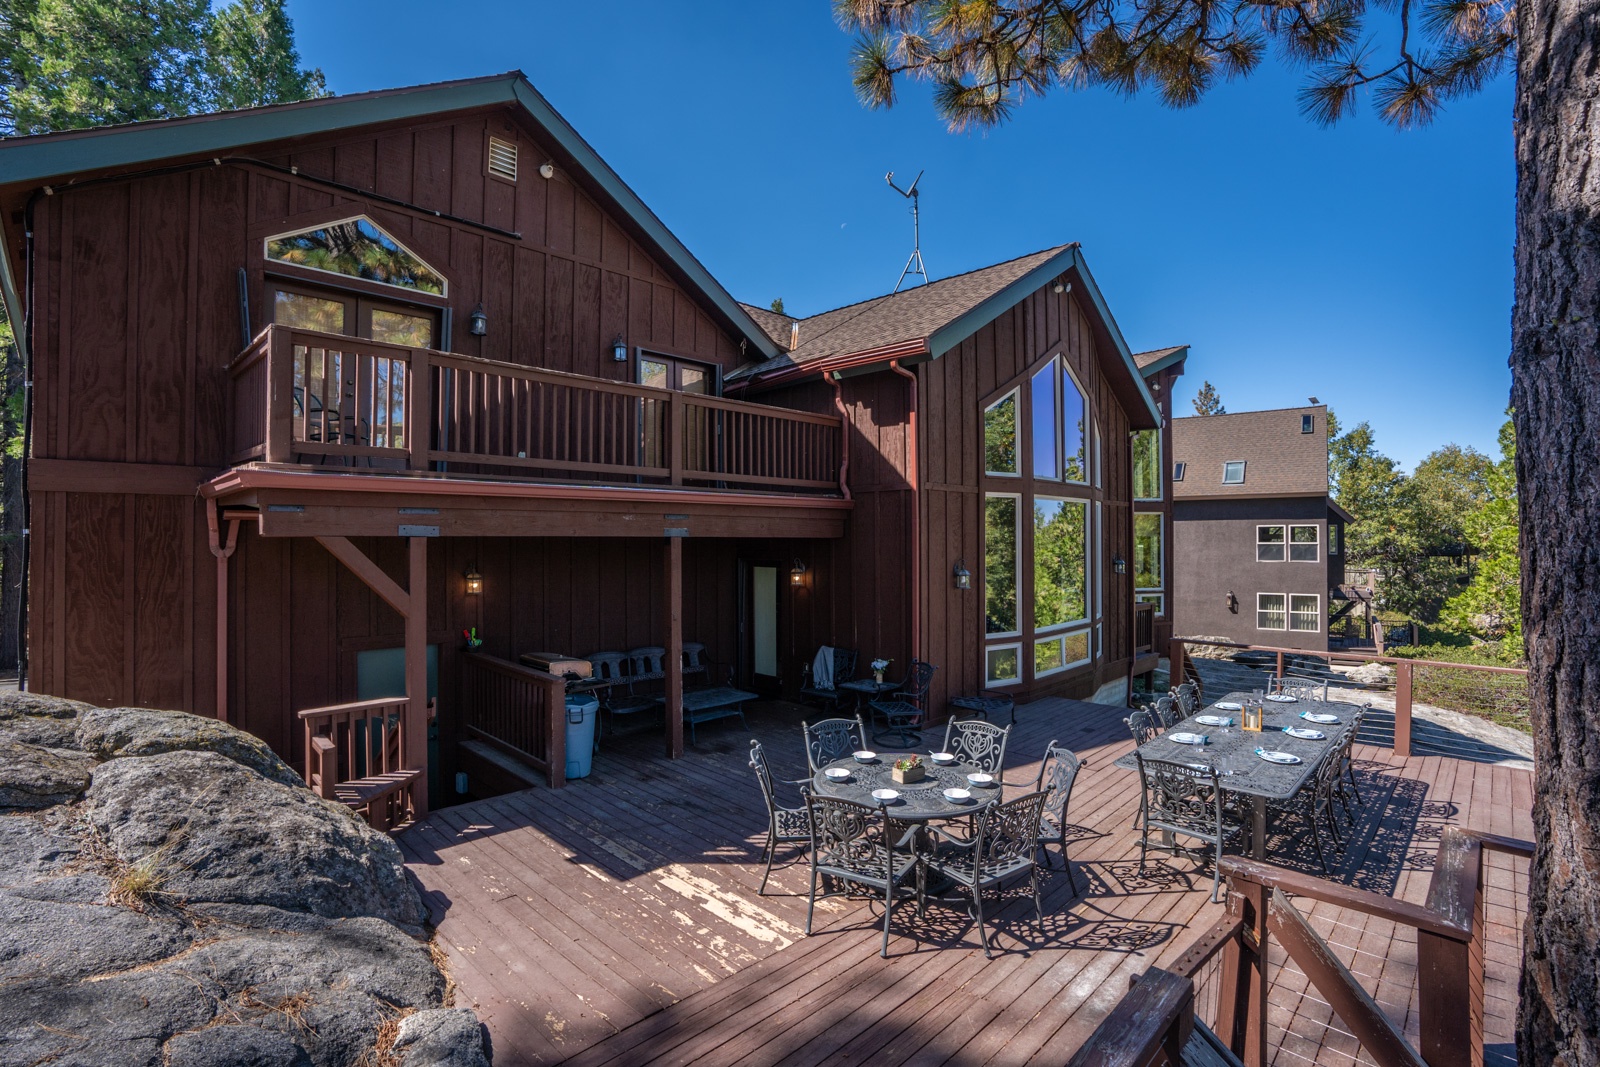 Enjoy meals & visiting together outdoors on the incredible back deck